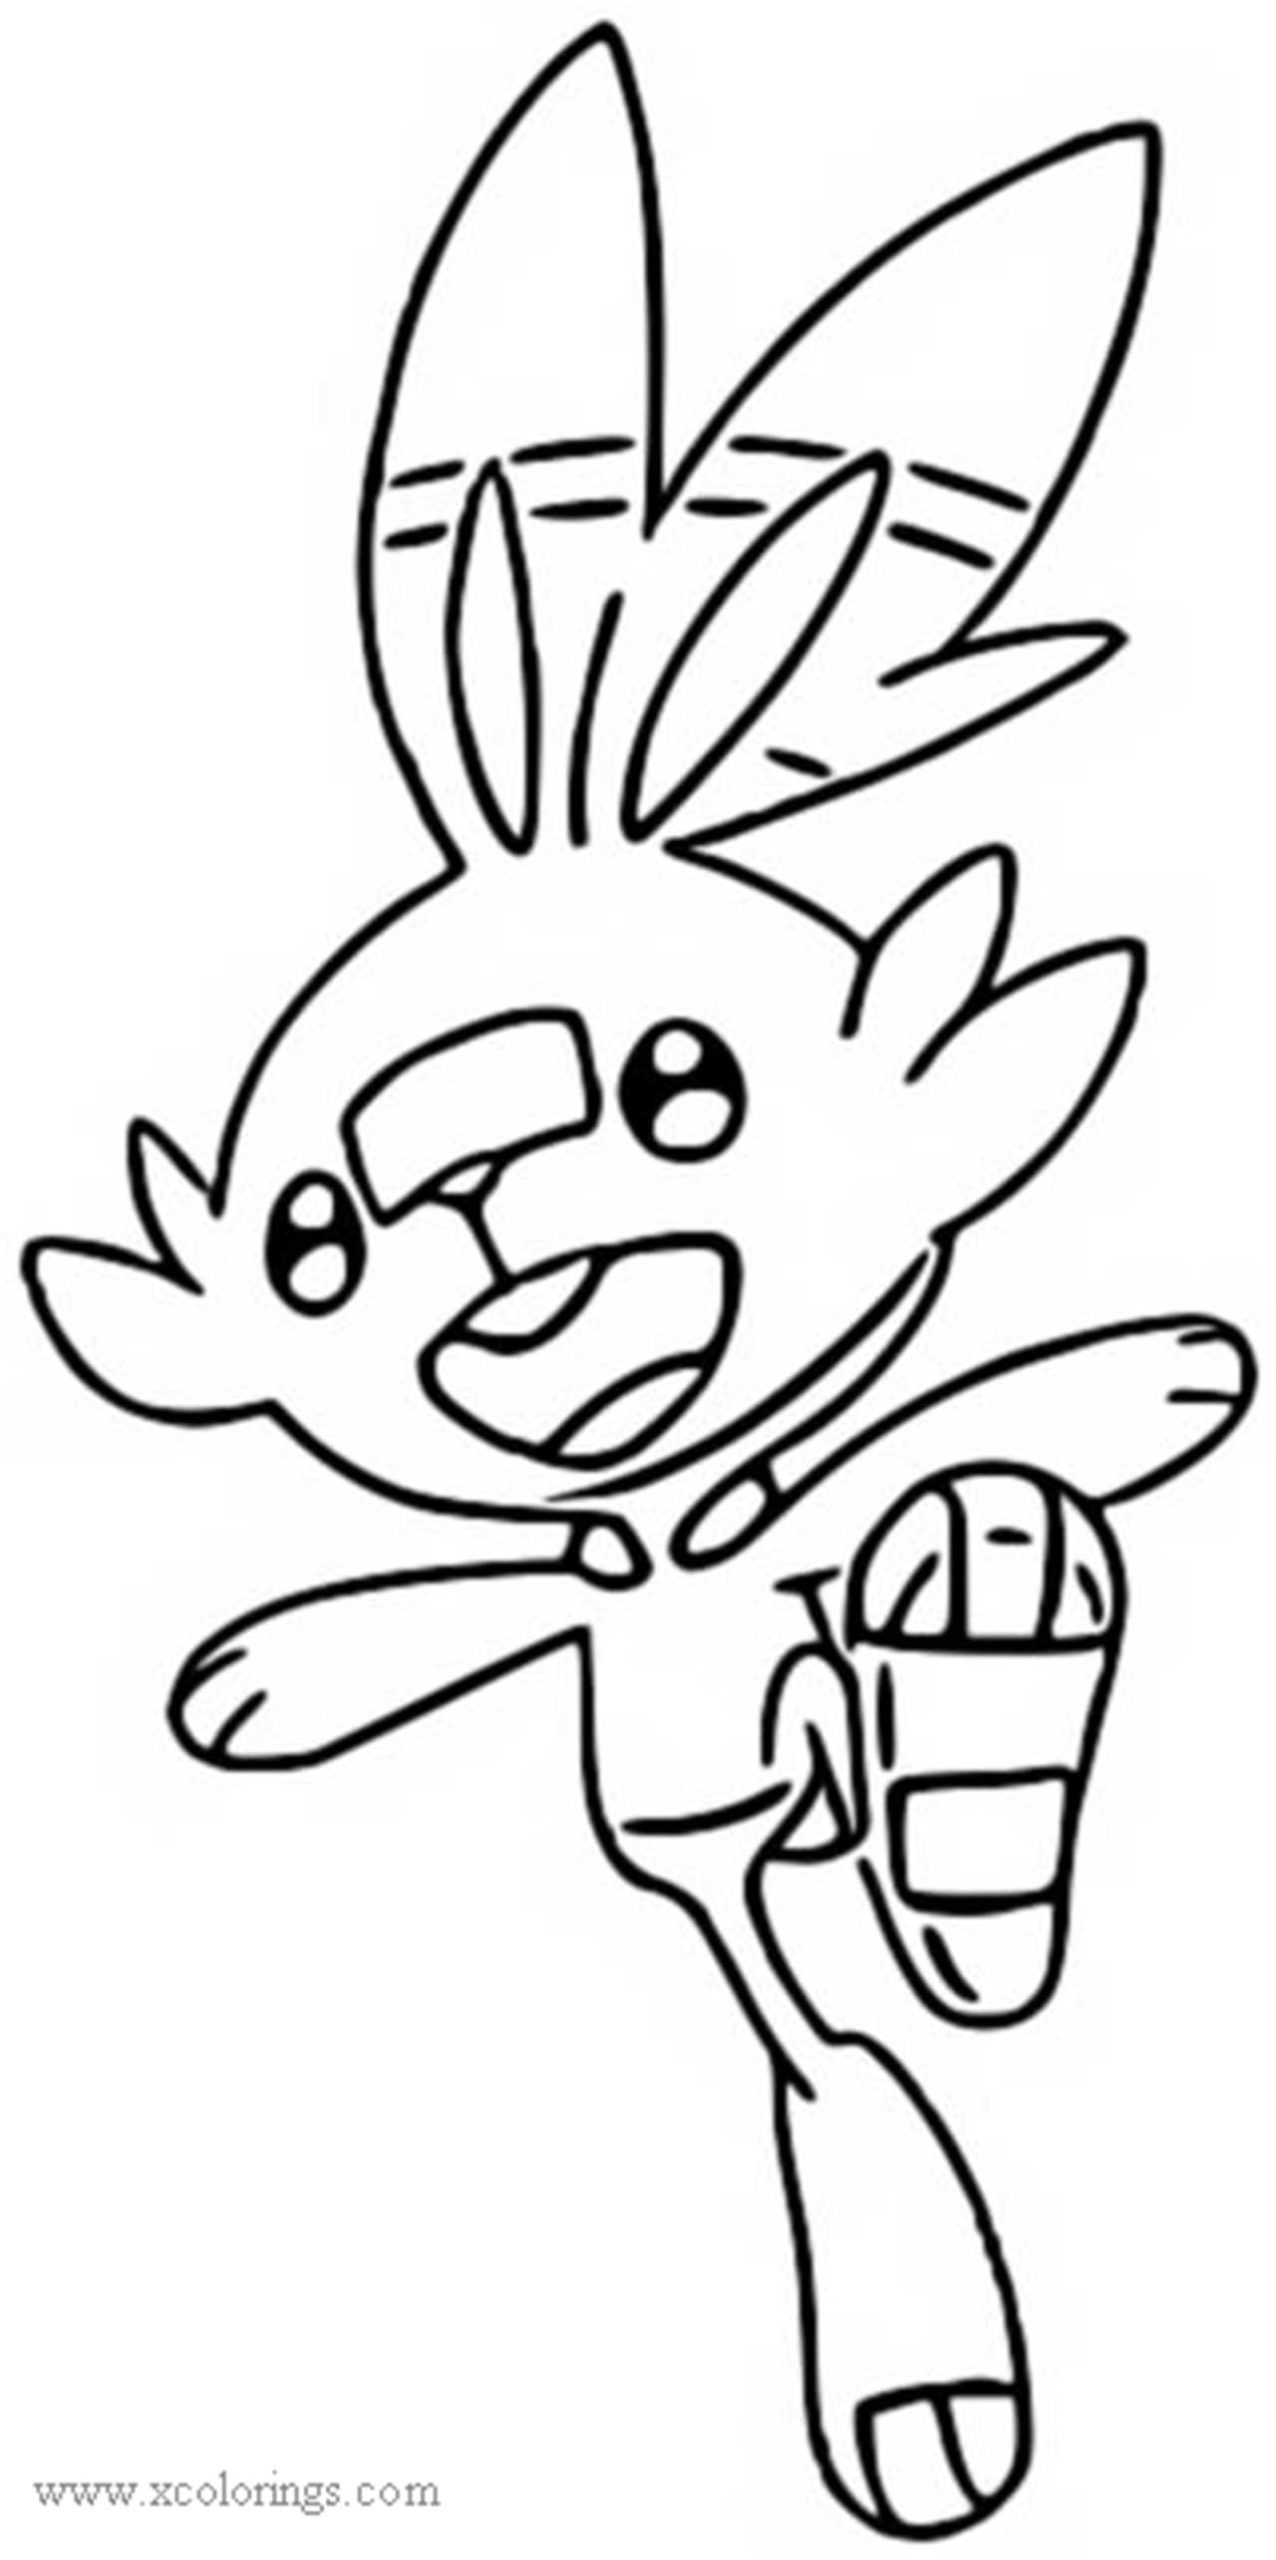 Scorbunny from Pokemon Sword and Shield Coloring Pages - XColorings.com